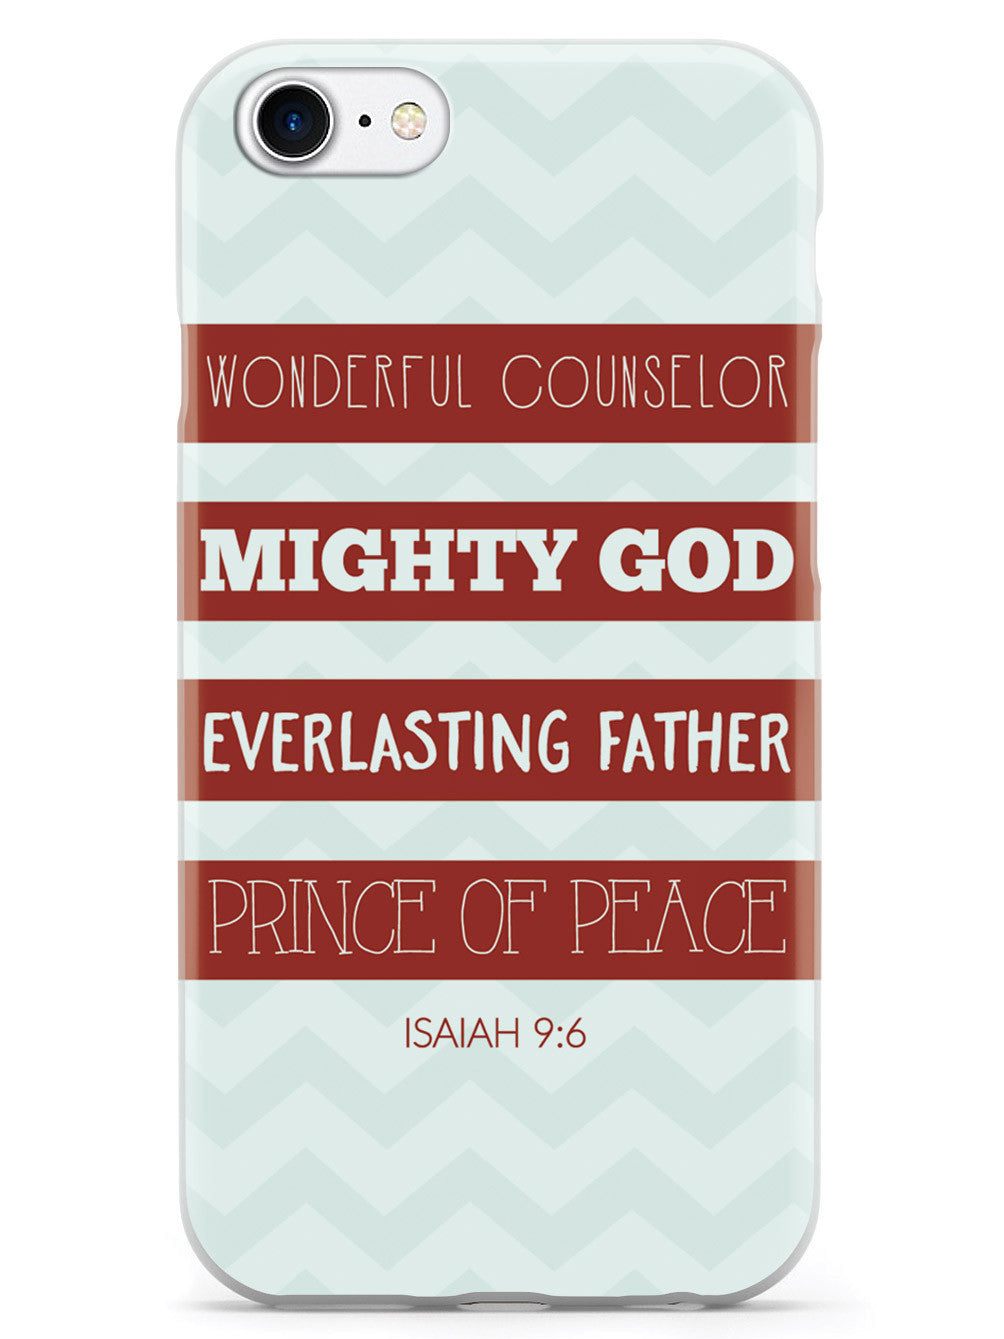 Isaiah 9:6 Bible Verse Quote Case